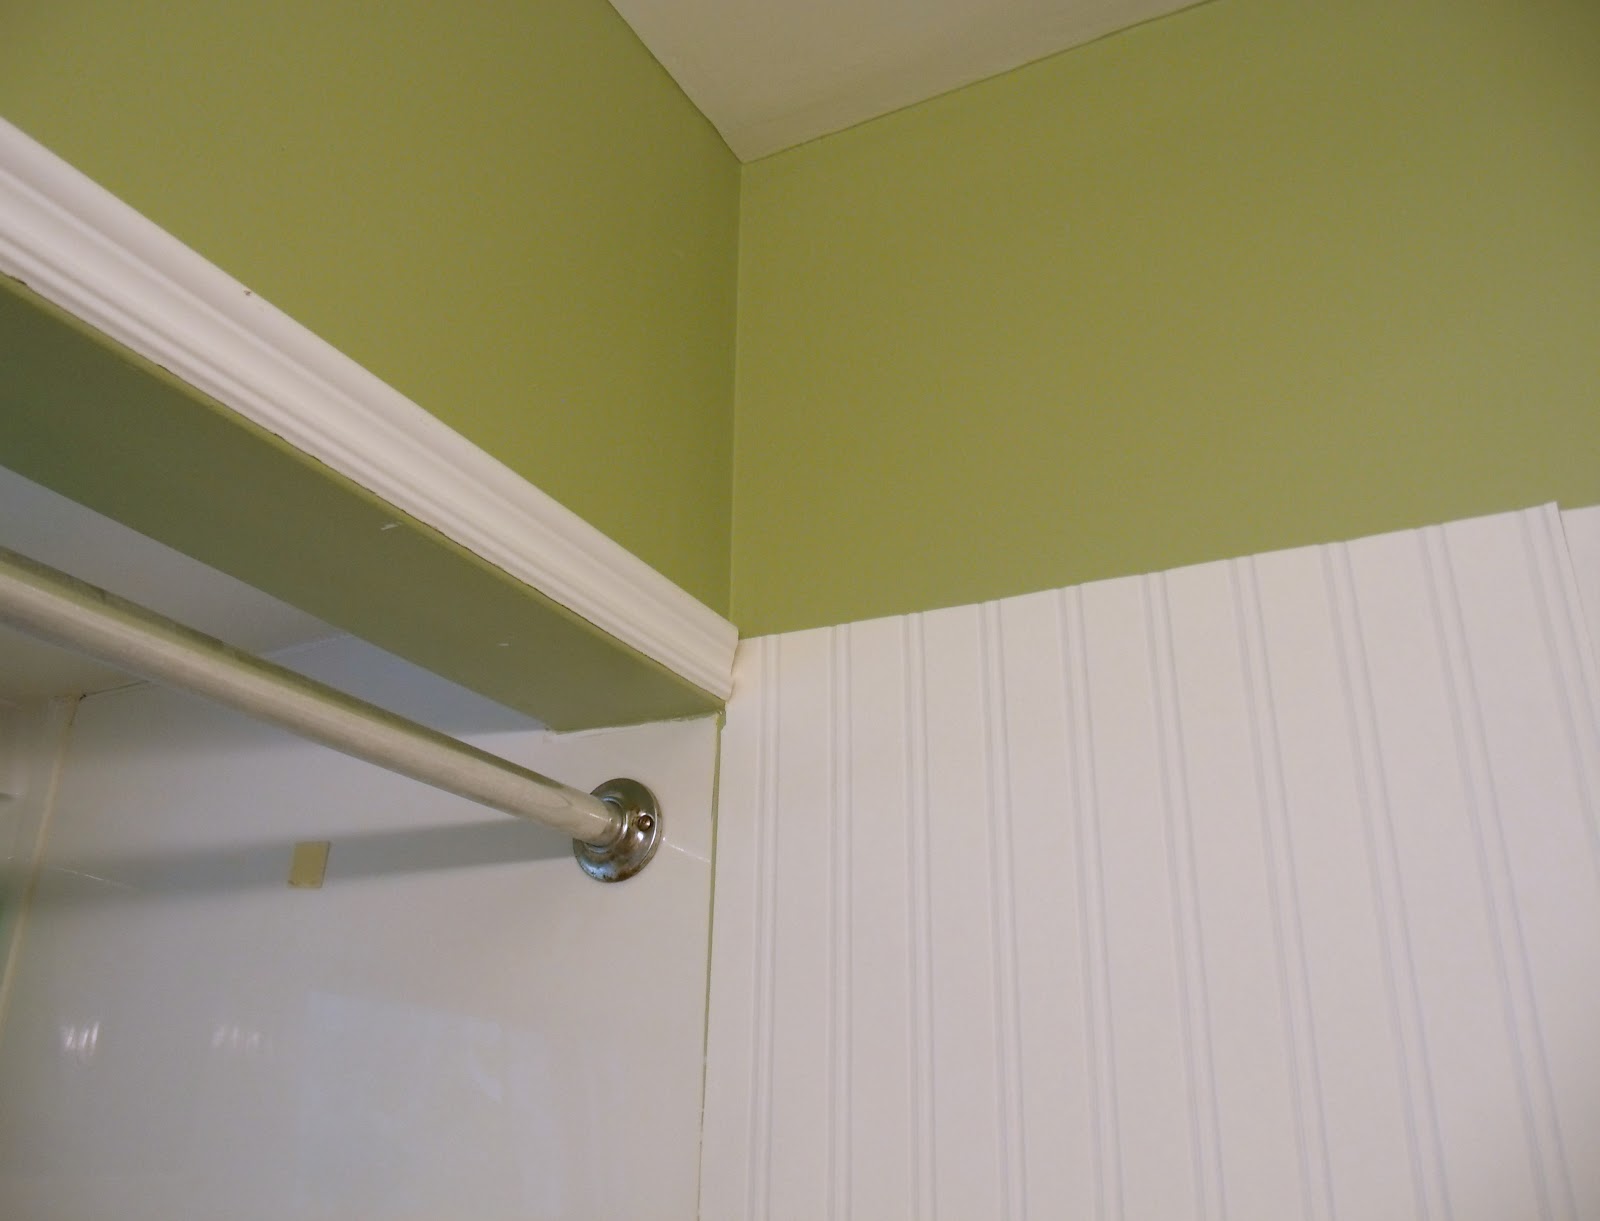 Frugal Family Times: How to Install Beadboard Paintable Wallpaper